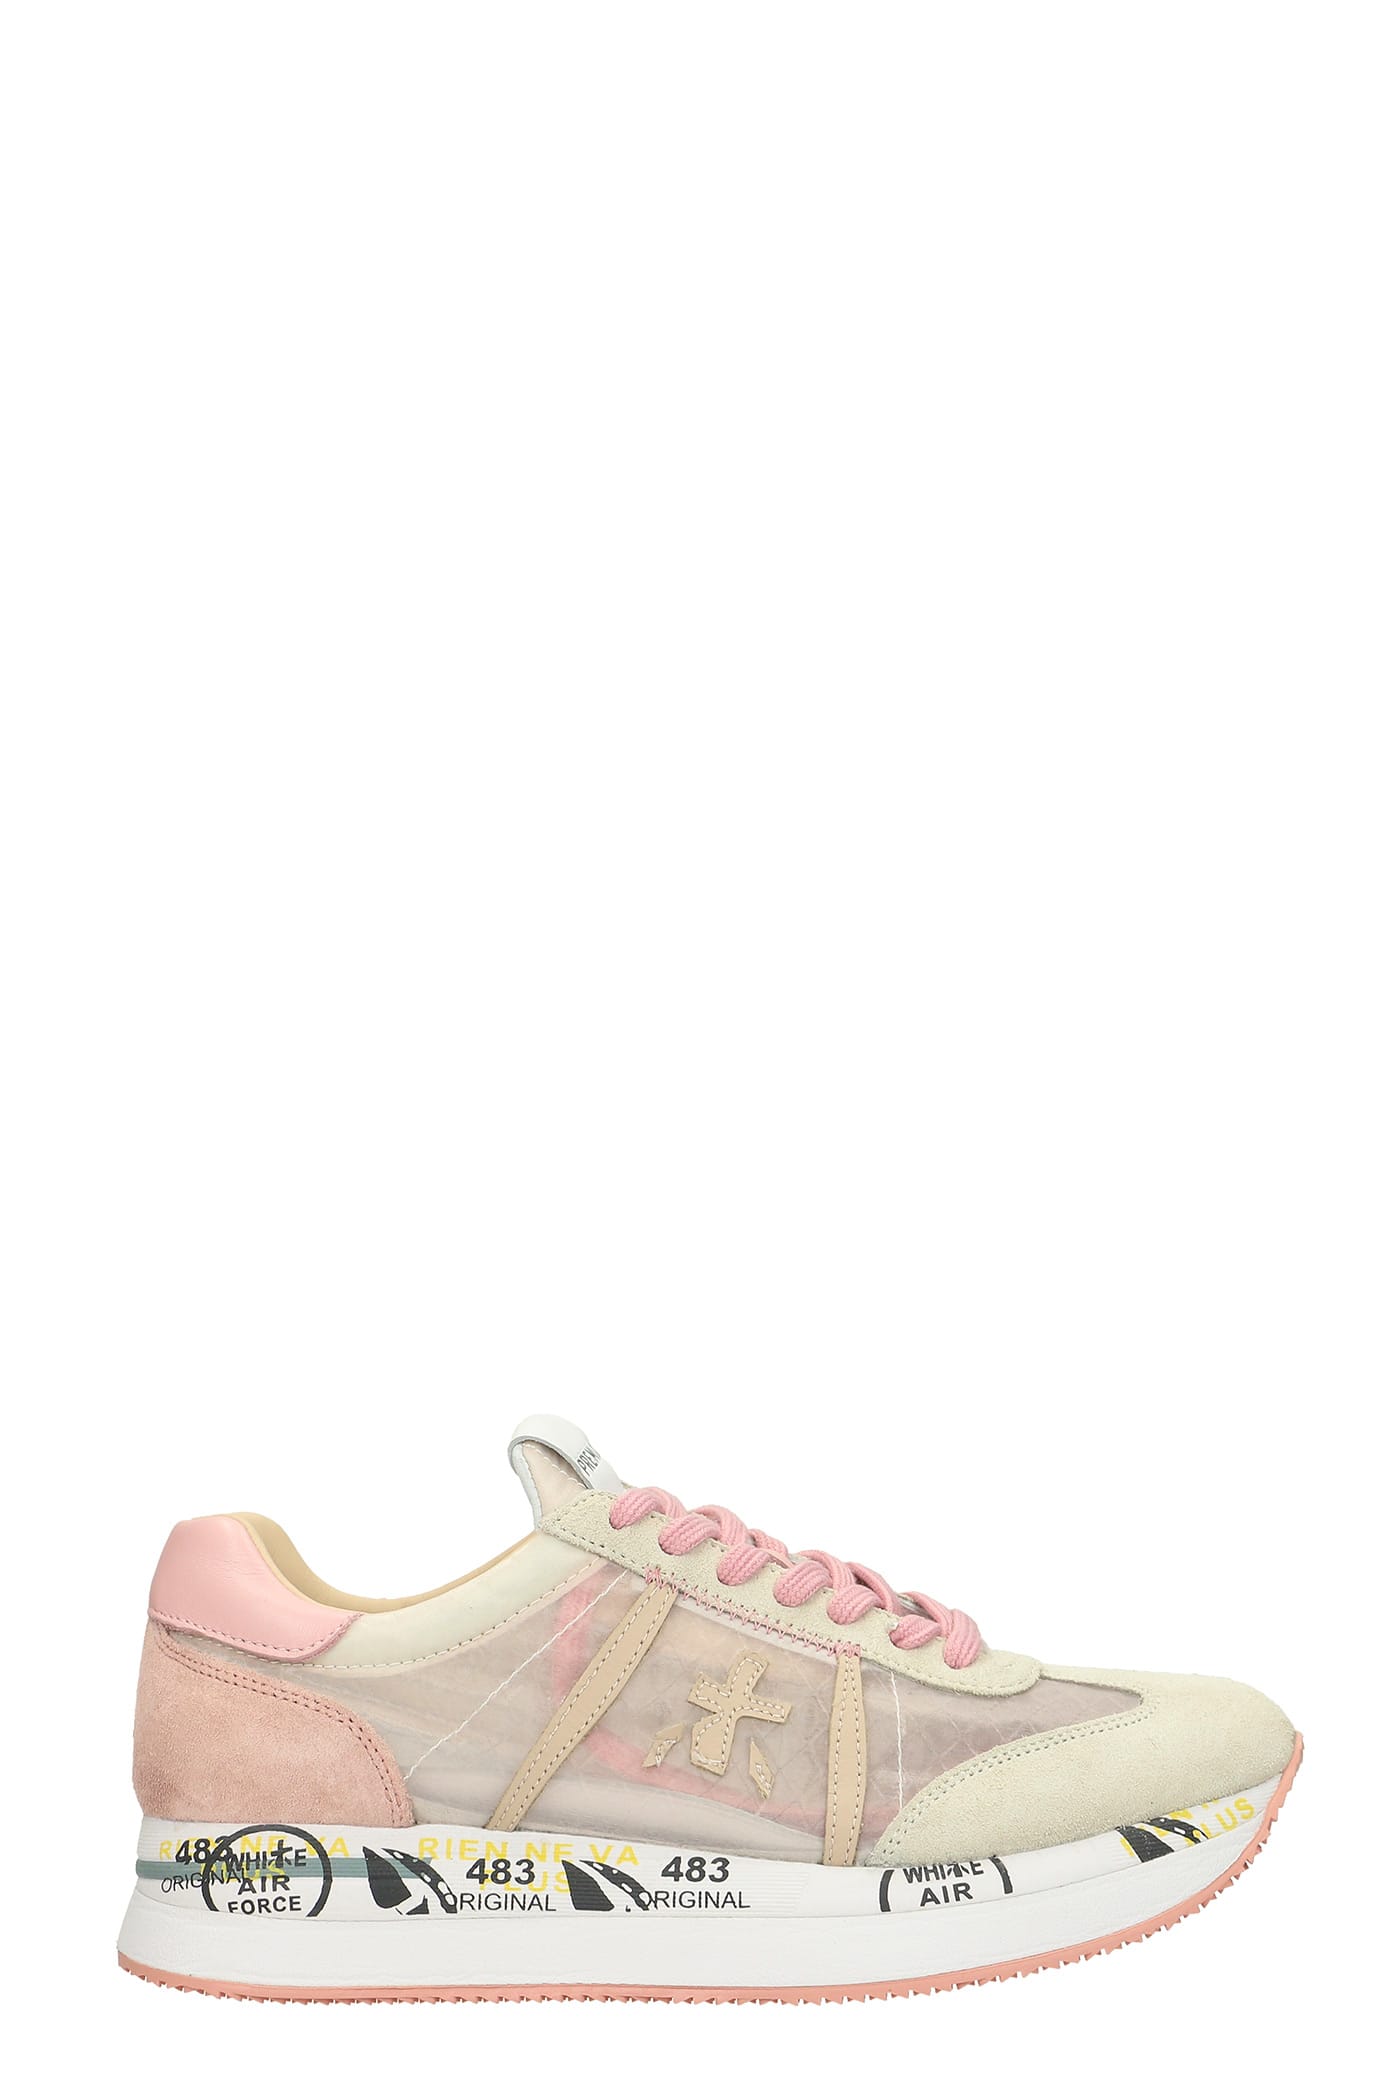 Premiata Conny Sneakers In Beige Suede And Fabric